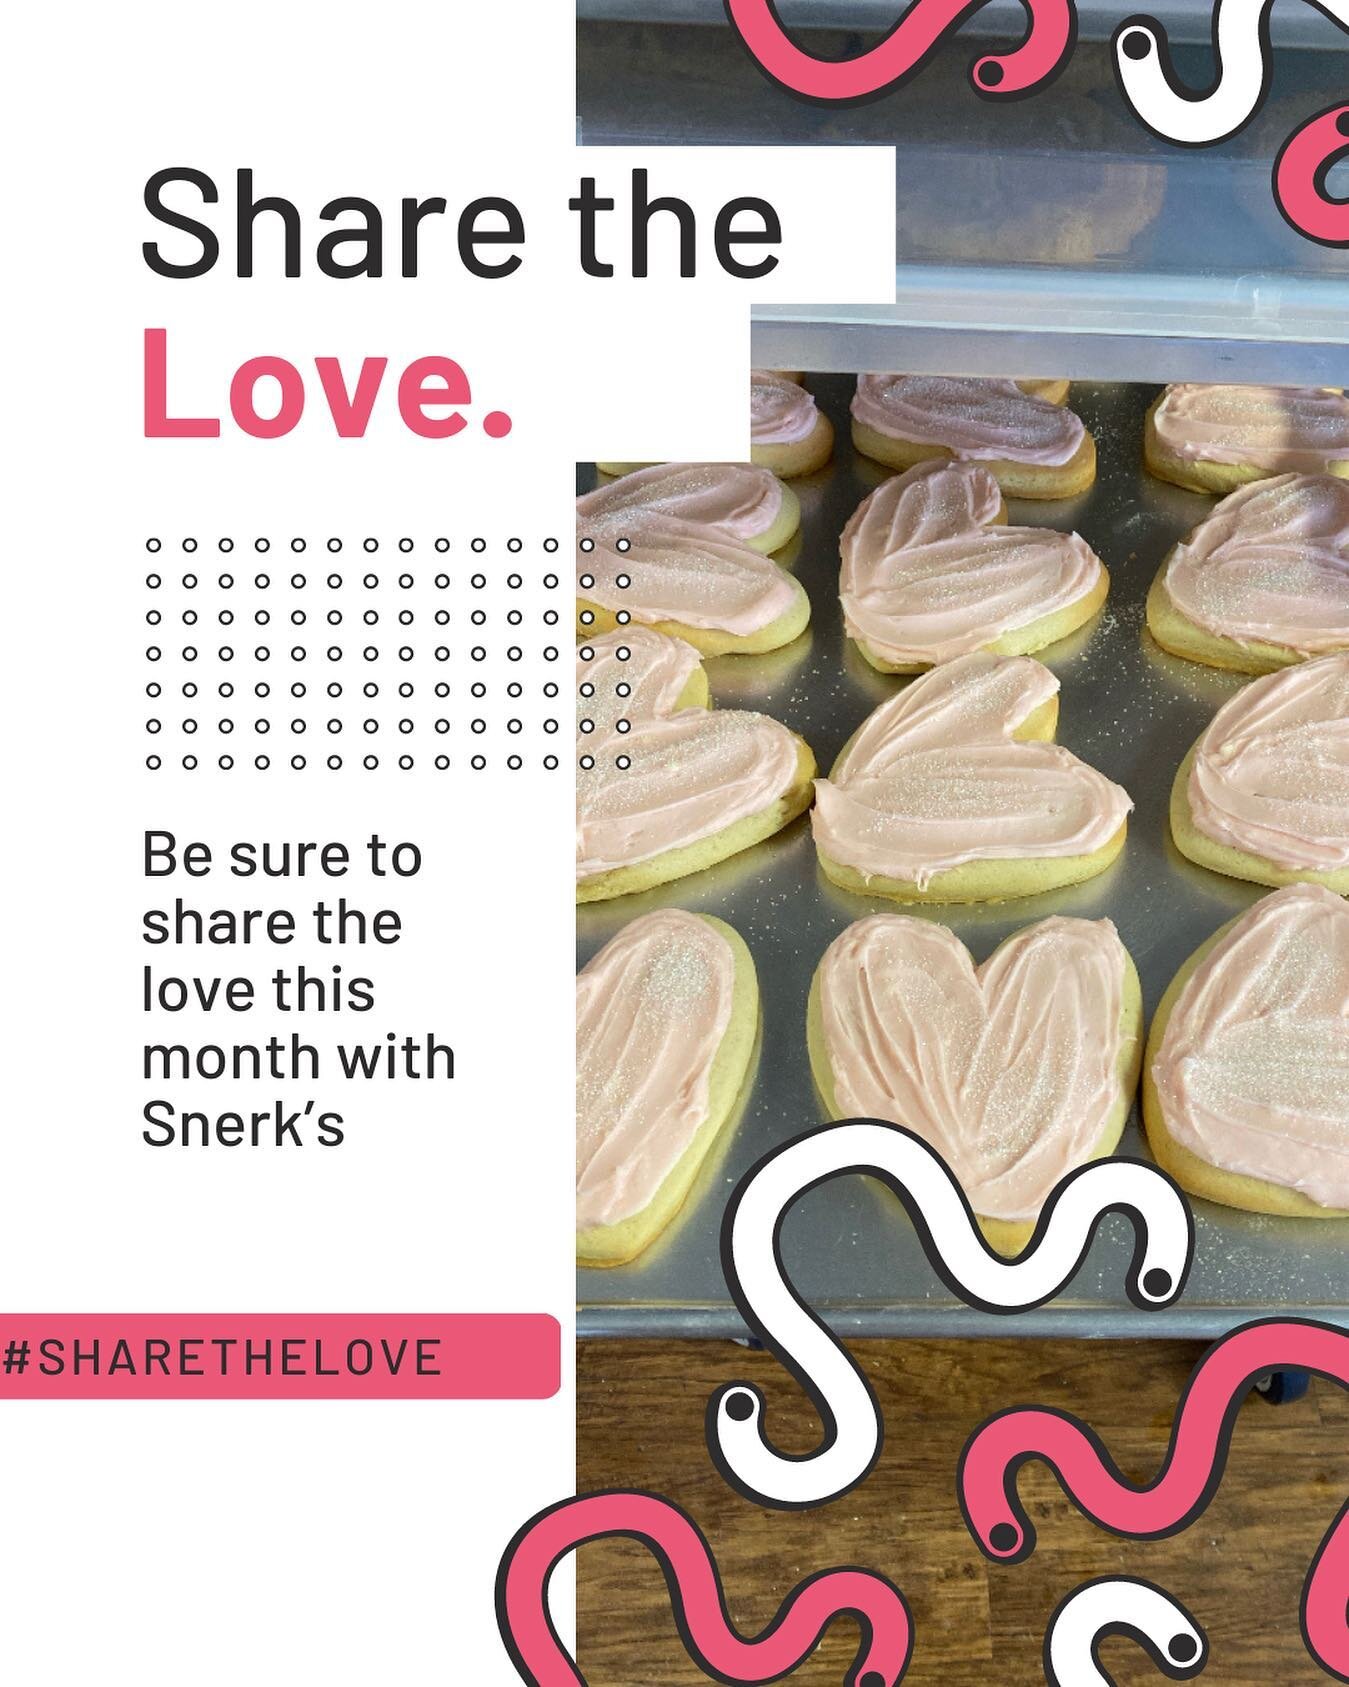 Share the love this month with the Snerkie Love!  Please pick up a special order form from Snerk&rsquo;s if planning to make a large order to ensure we can fulfill all of your Snerkie needs! #sharethelove